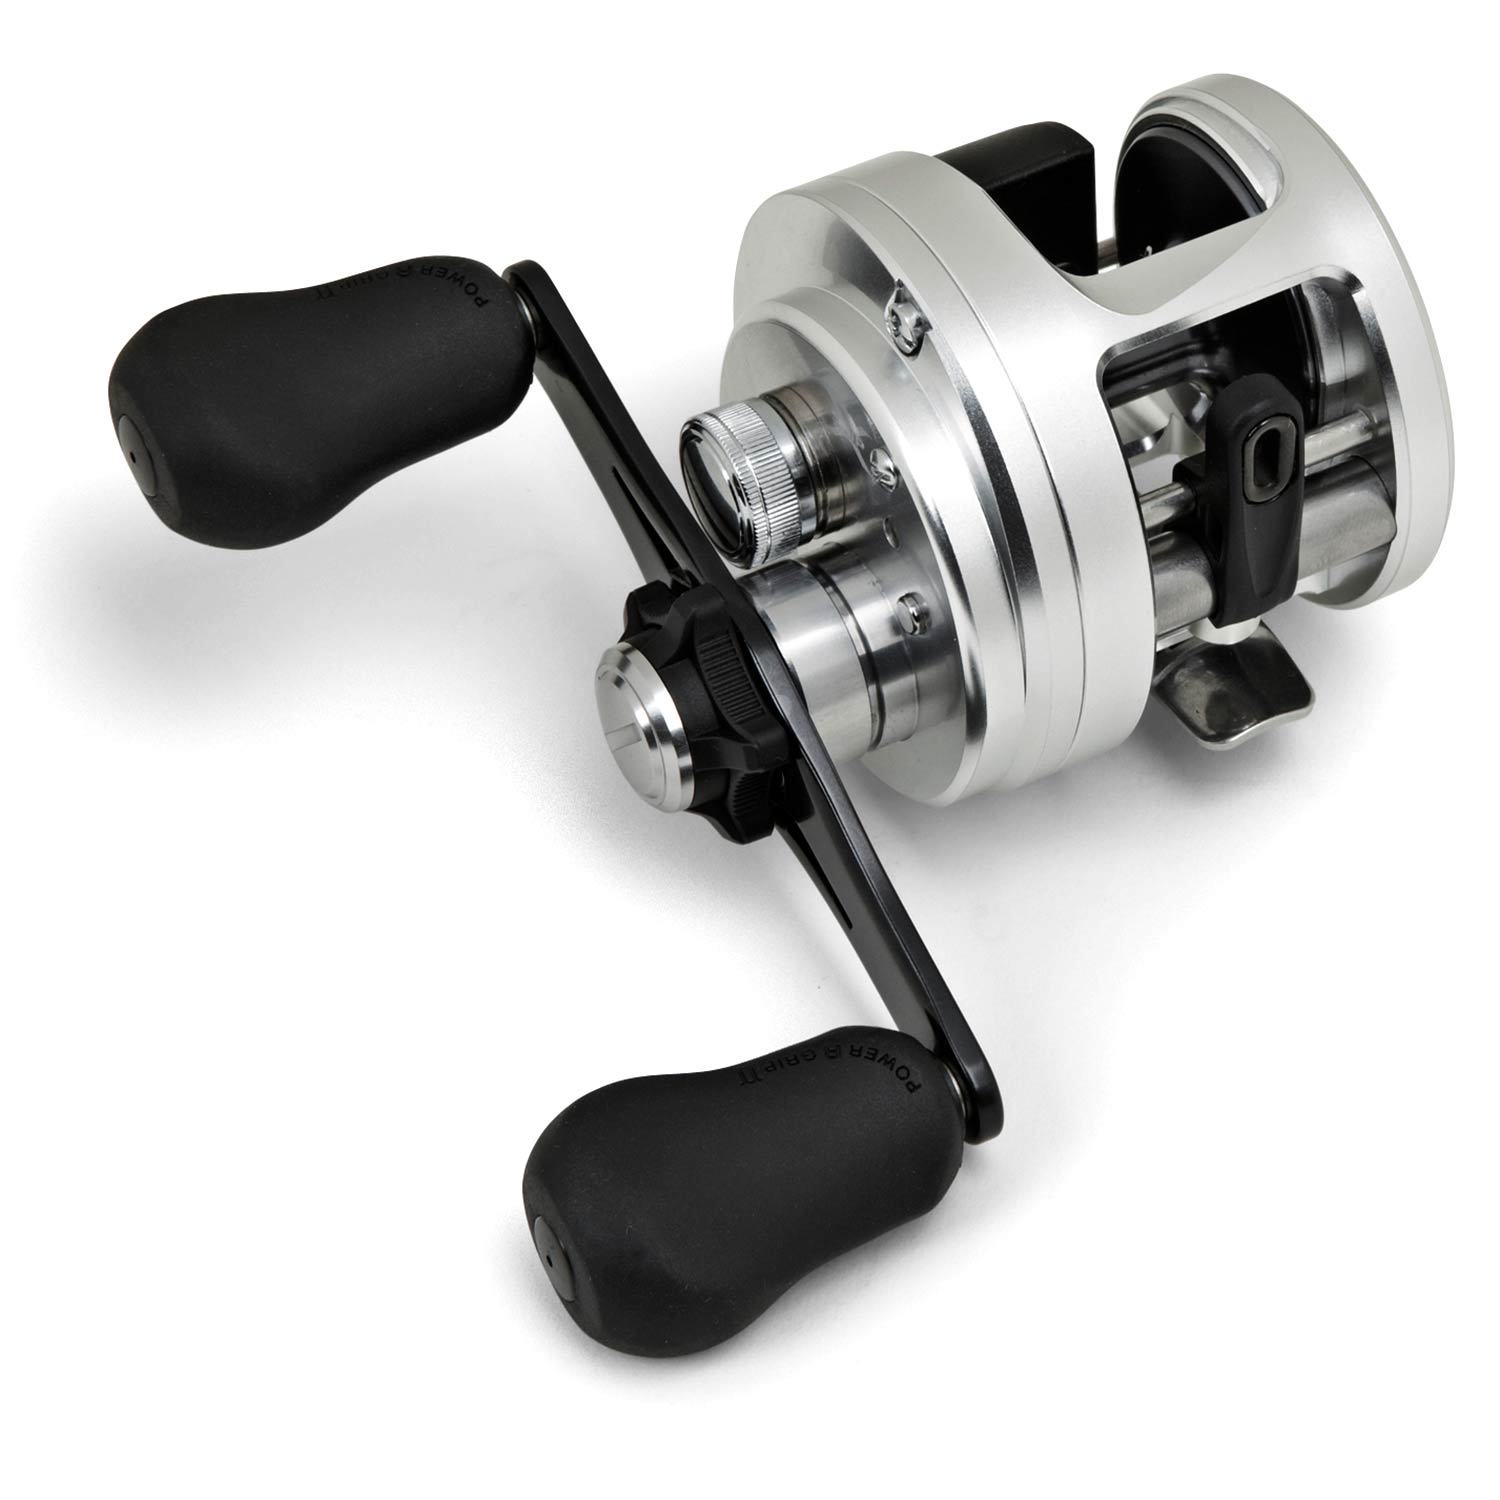 Cleaning the Shimano Calcutta Reel